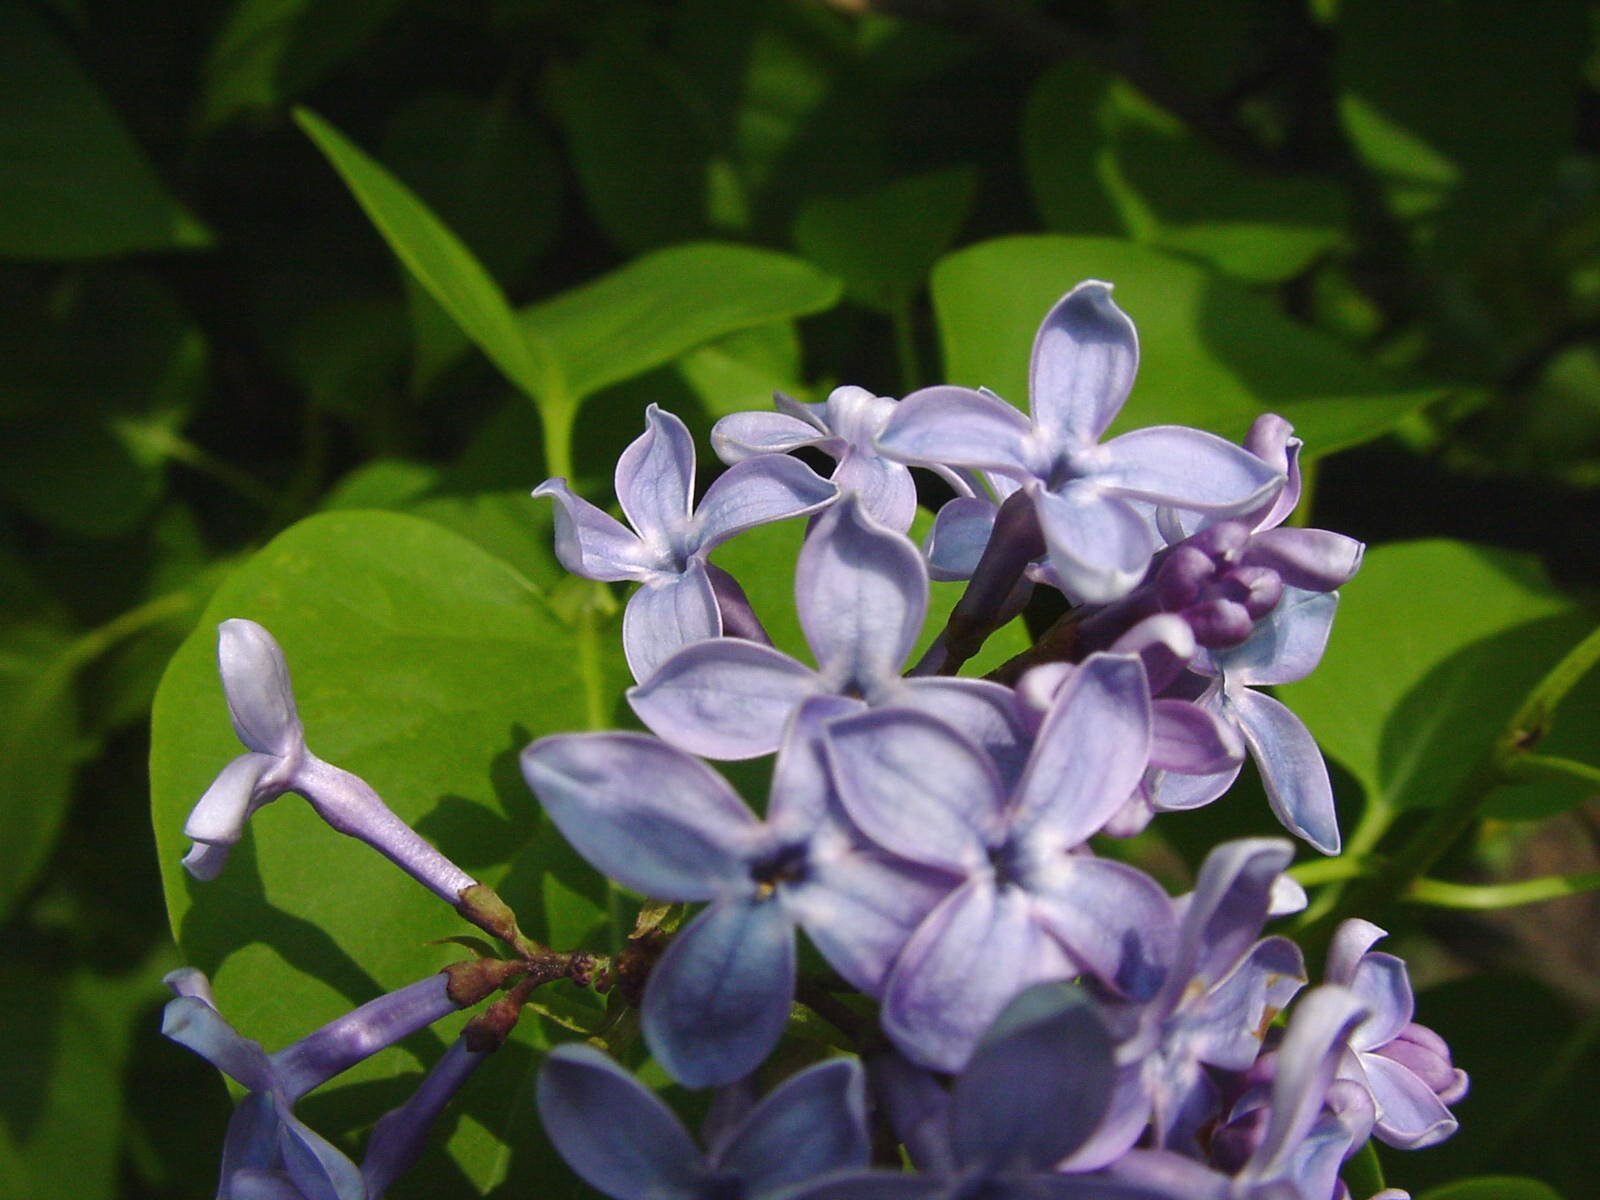 a closeup image of a cluster of flowers